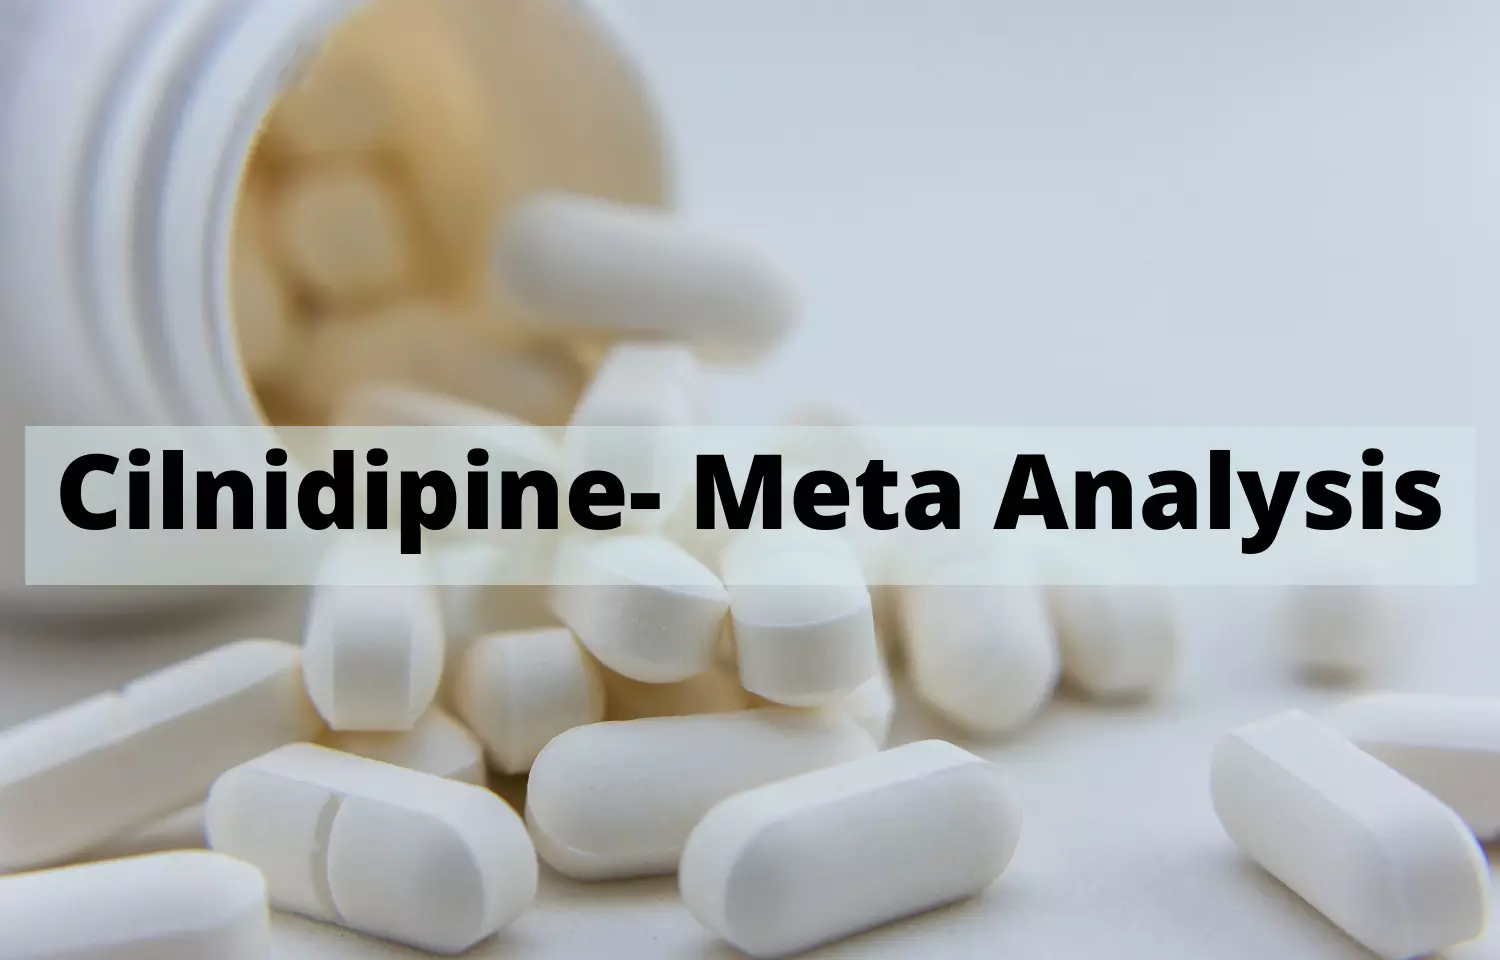 Cilnidipine shows promise as first-line antihypertensive, both in monotherapy or combination: Meta-analysis